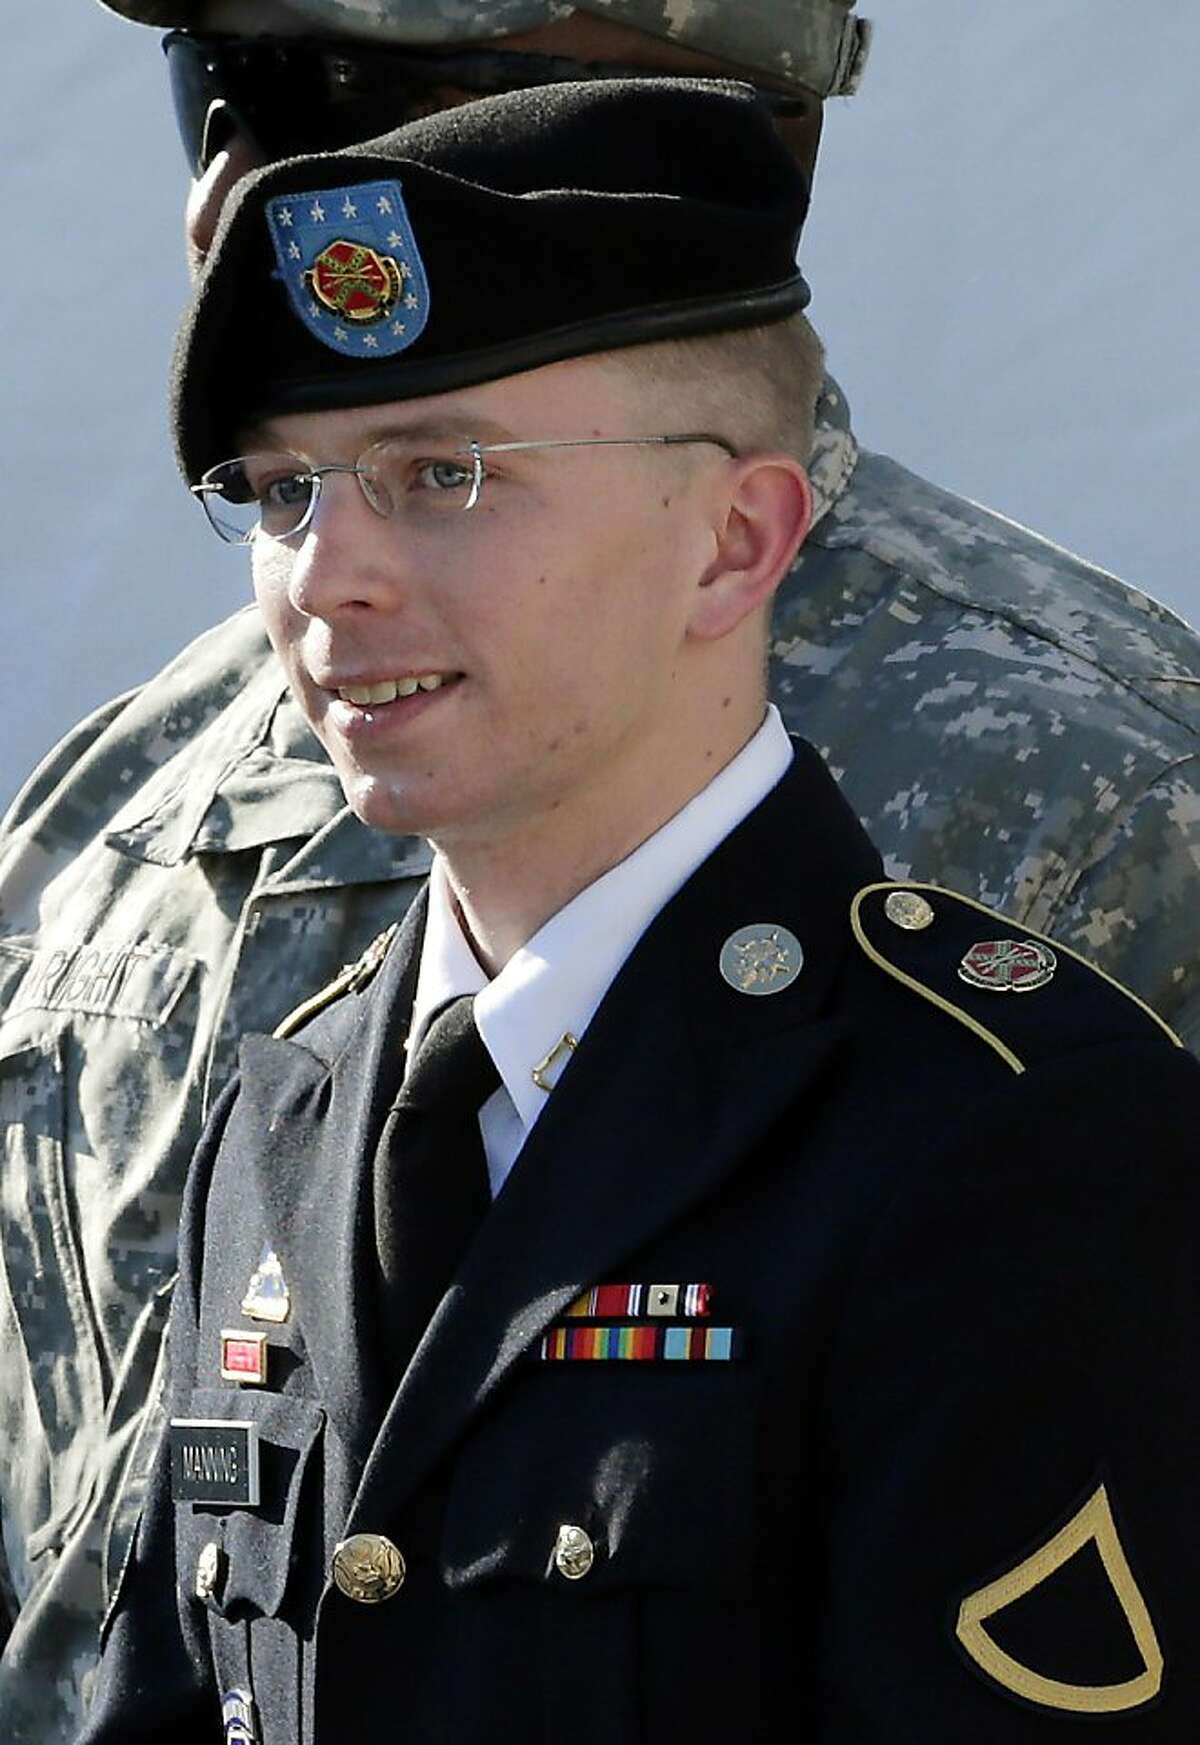 FILE - In this June 25, 2012 file photo, Army Pfc. Bradley Manning is escorted out of a courthouse in Fort Meade, Md., after a pretrial hearing. A military judge hears closing arguments on Tuesday, Dec. 12, 2012, on whether Manning who is charged with sending classified material to WikiLeaks, suffered illegal pretrial punishment during nine months in a Marine Corps brig. Army Pfc. Bradley Manning's lawyers claim his treatment was so egregious that all charges should be dismissed. (AP Photo/Patrick Semansky, HO)